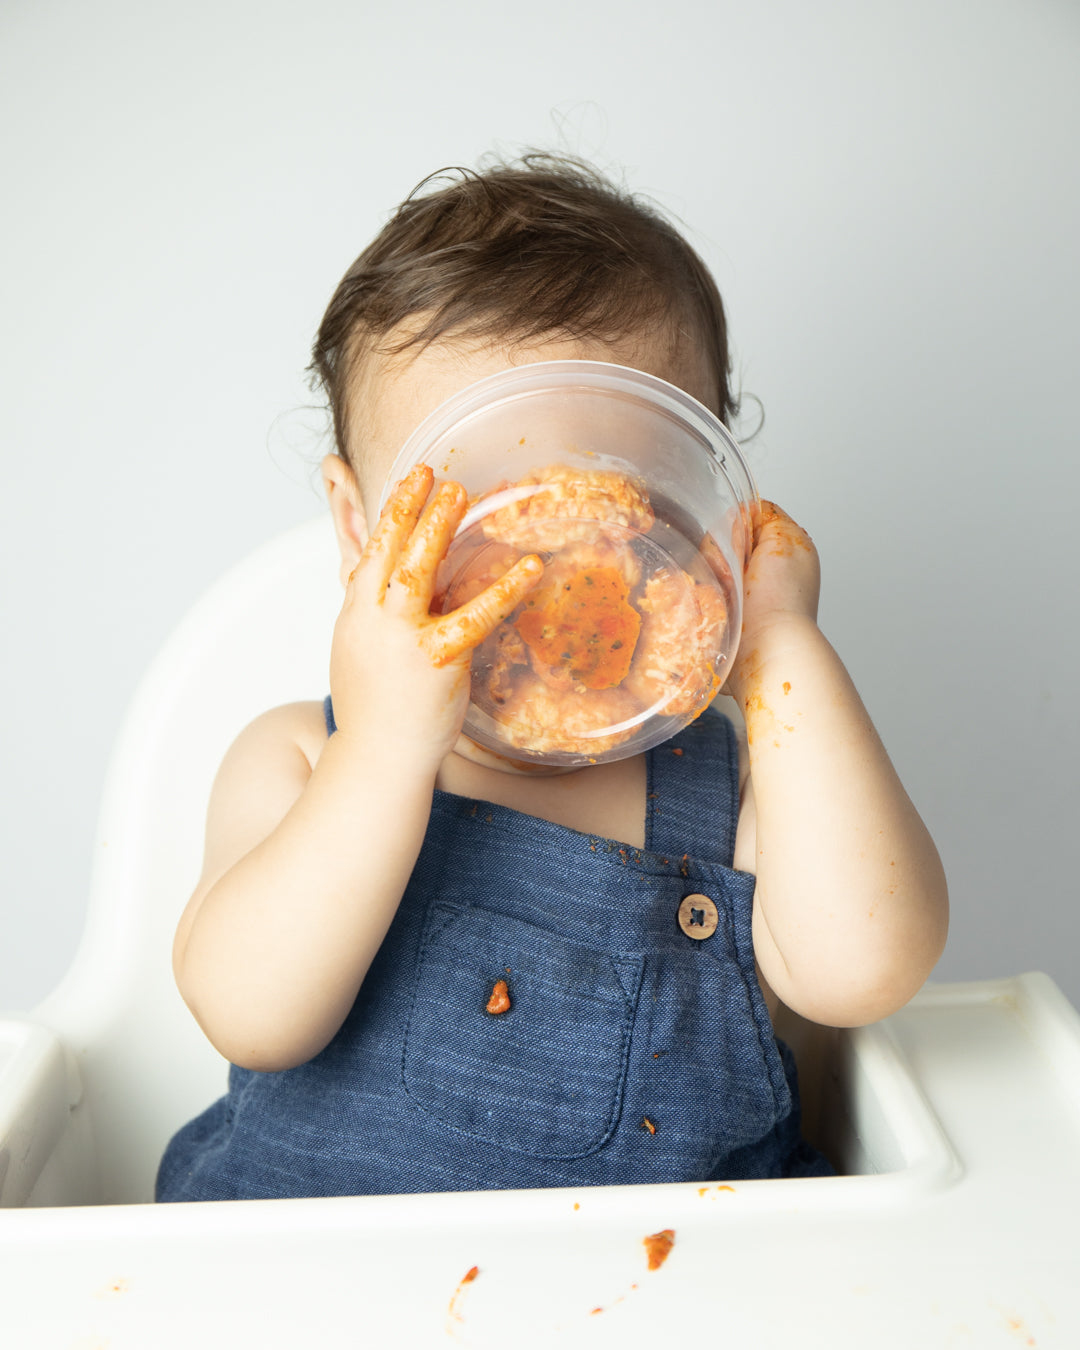 Vitamins & Minerals Your Weaning Baby Needs